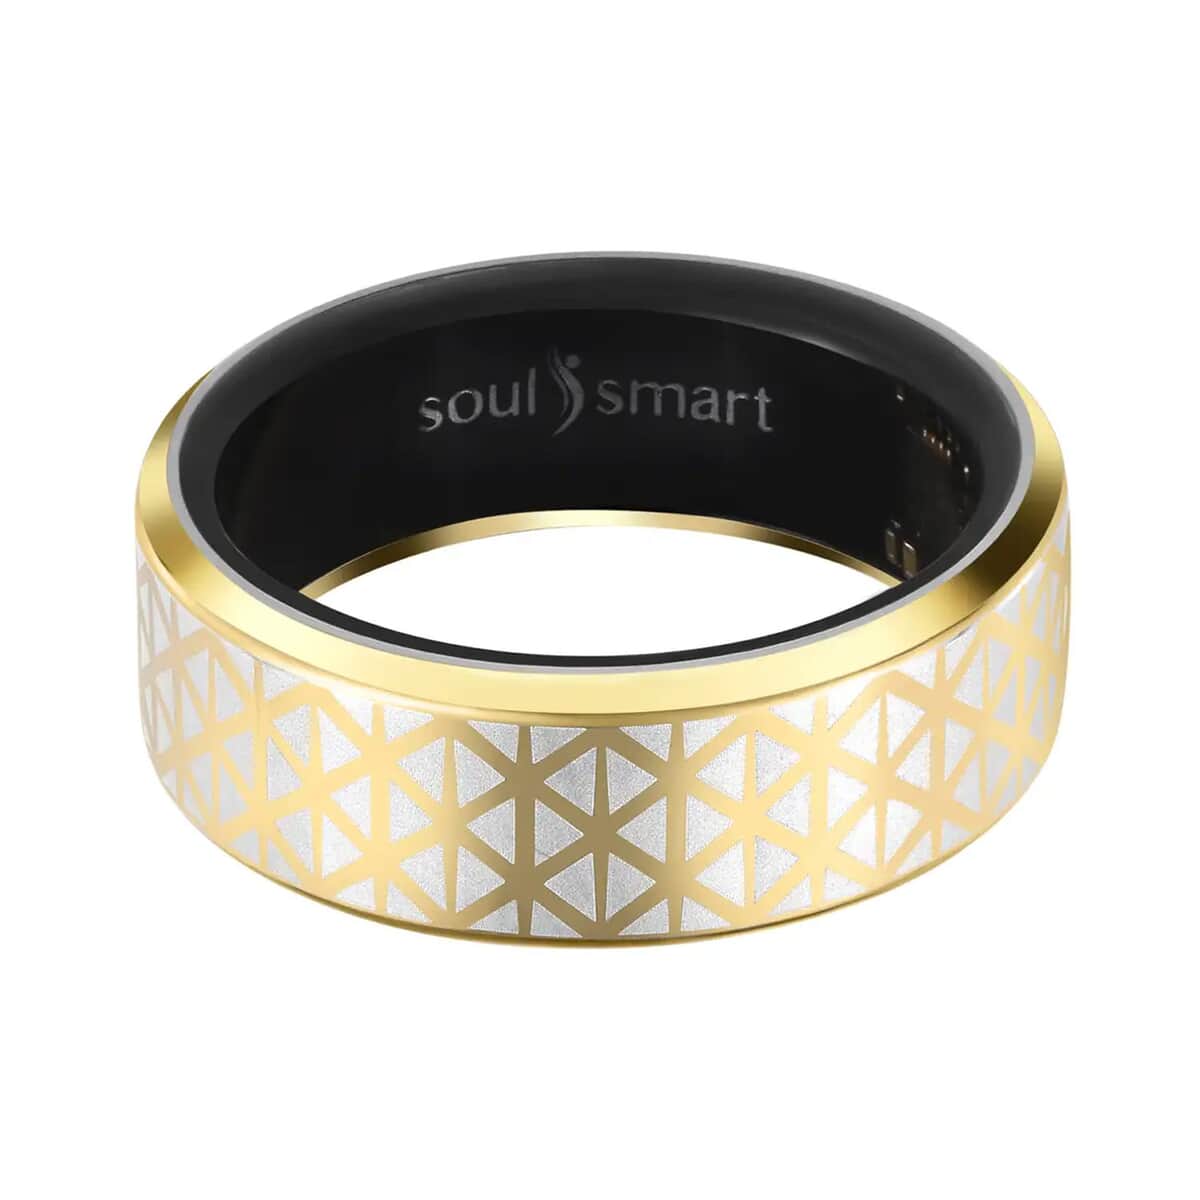 Soulsmart Multifunctional Health Tracker Smart Ring (Size 11.0) in ION Plated YG Stainless Steel (Compatible with Android 5.0+ & Apple IOS 10.0+ Systems) image number 2